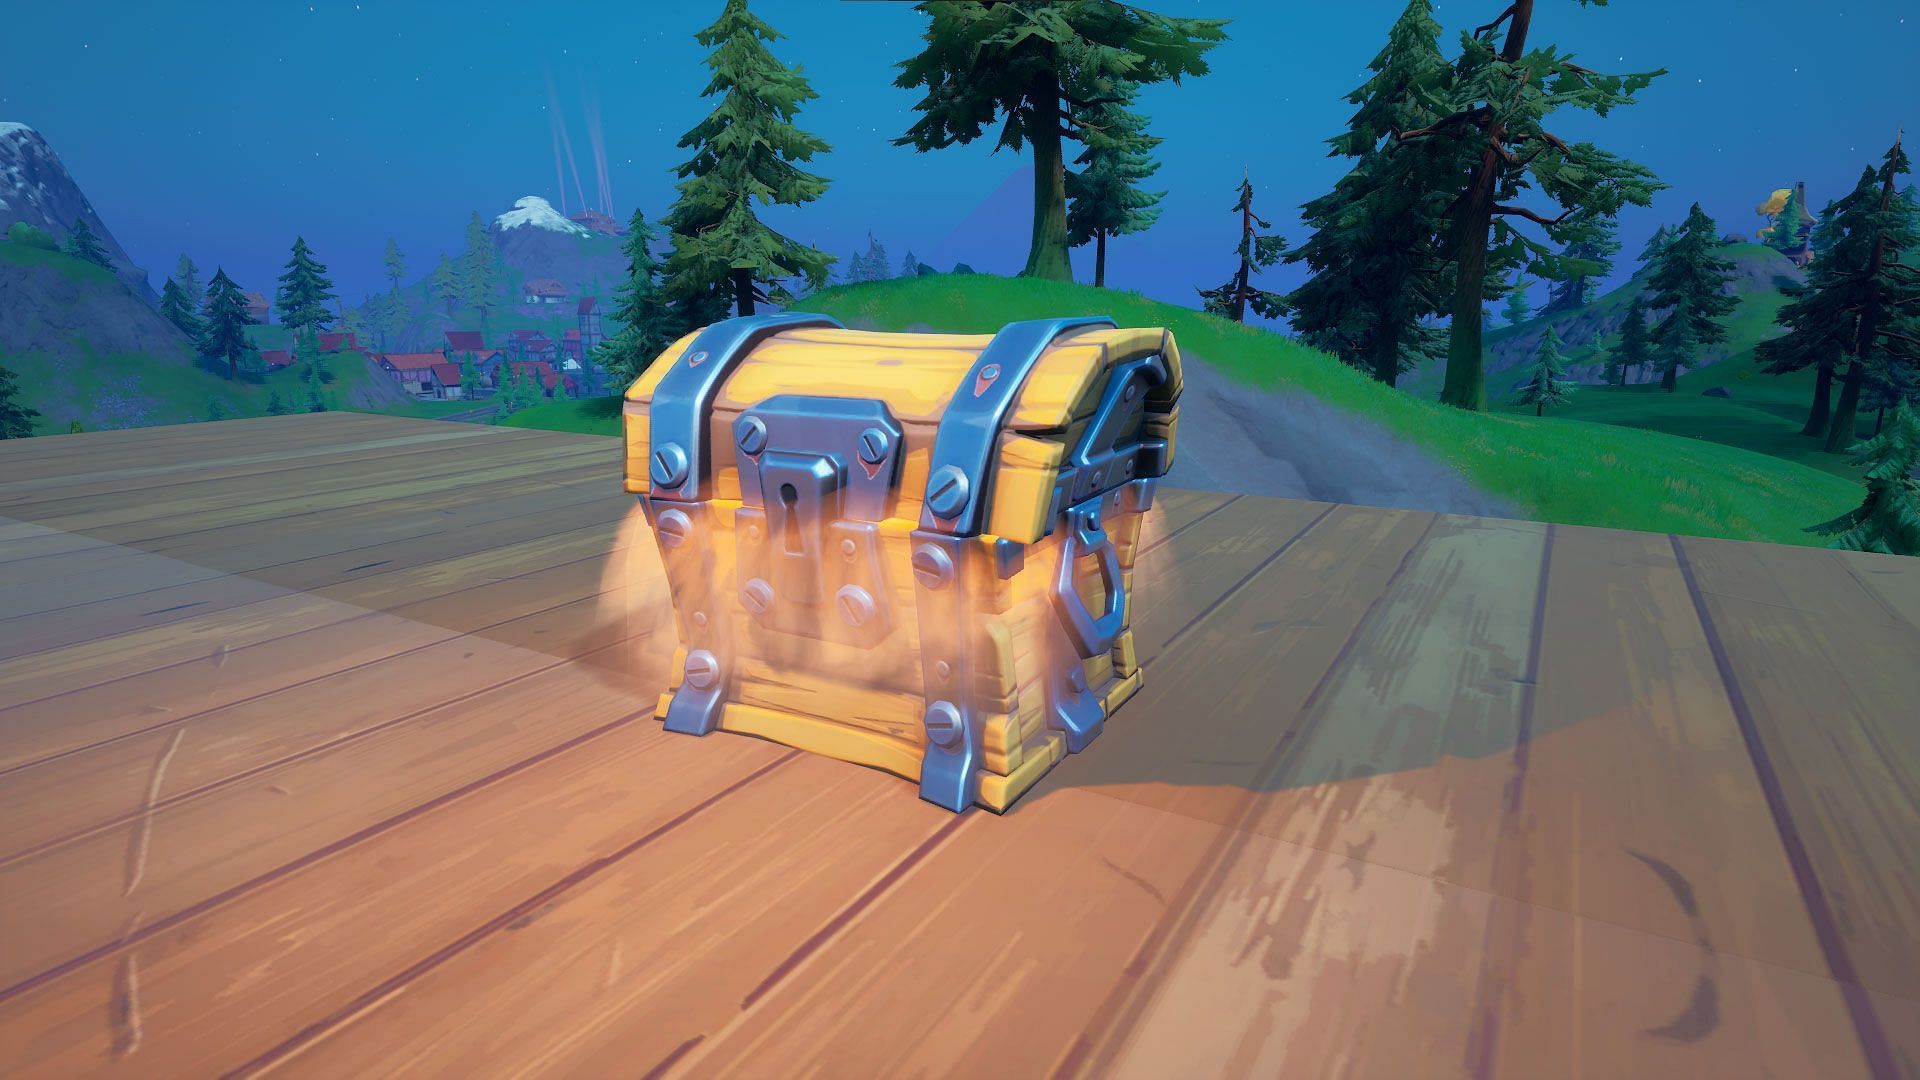 Chests offer some great loot in the game (Image via Epic Games)